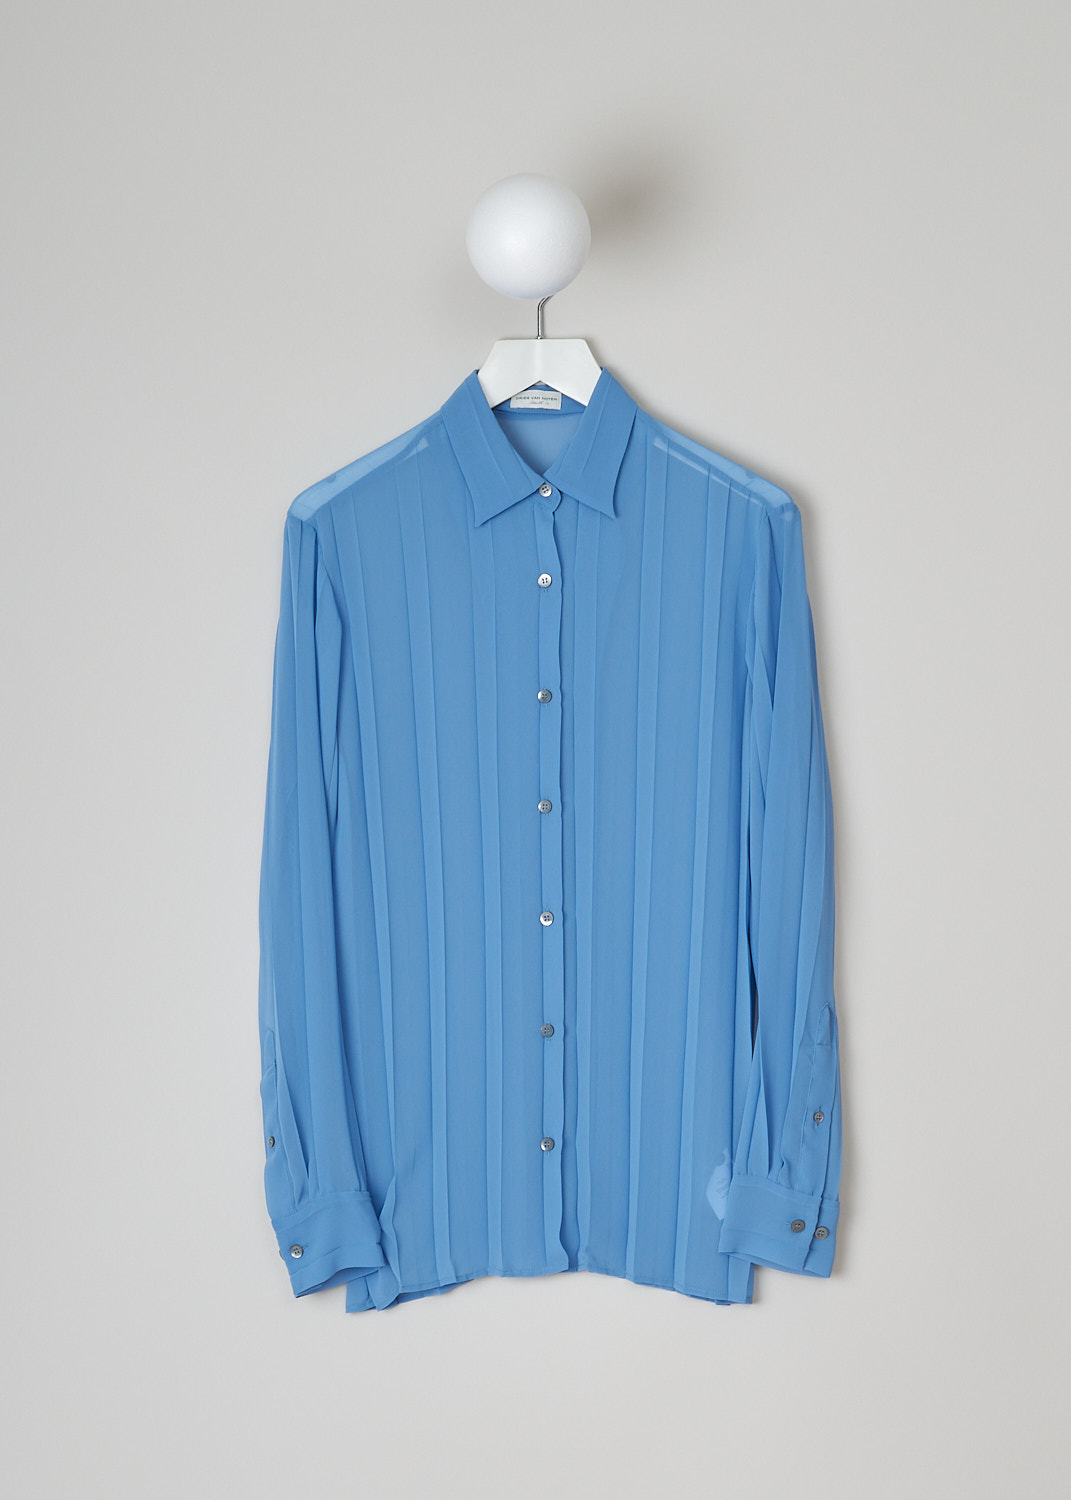 DRIES VAN NOTEN, SKY BLUE PLEATED CLAVELLY BLOUSE, CLAVELLY_PLEATS_6265_WW_SHIRT_SKY, Blue,  Front, This sky blue semi sheer Clavelly blouse is fully pleated. The blouse has a spread collar and a front button closure. The long sleeves have buttoned cuffs.   
